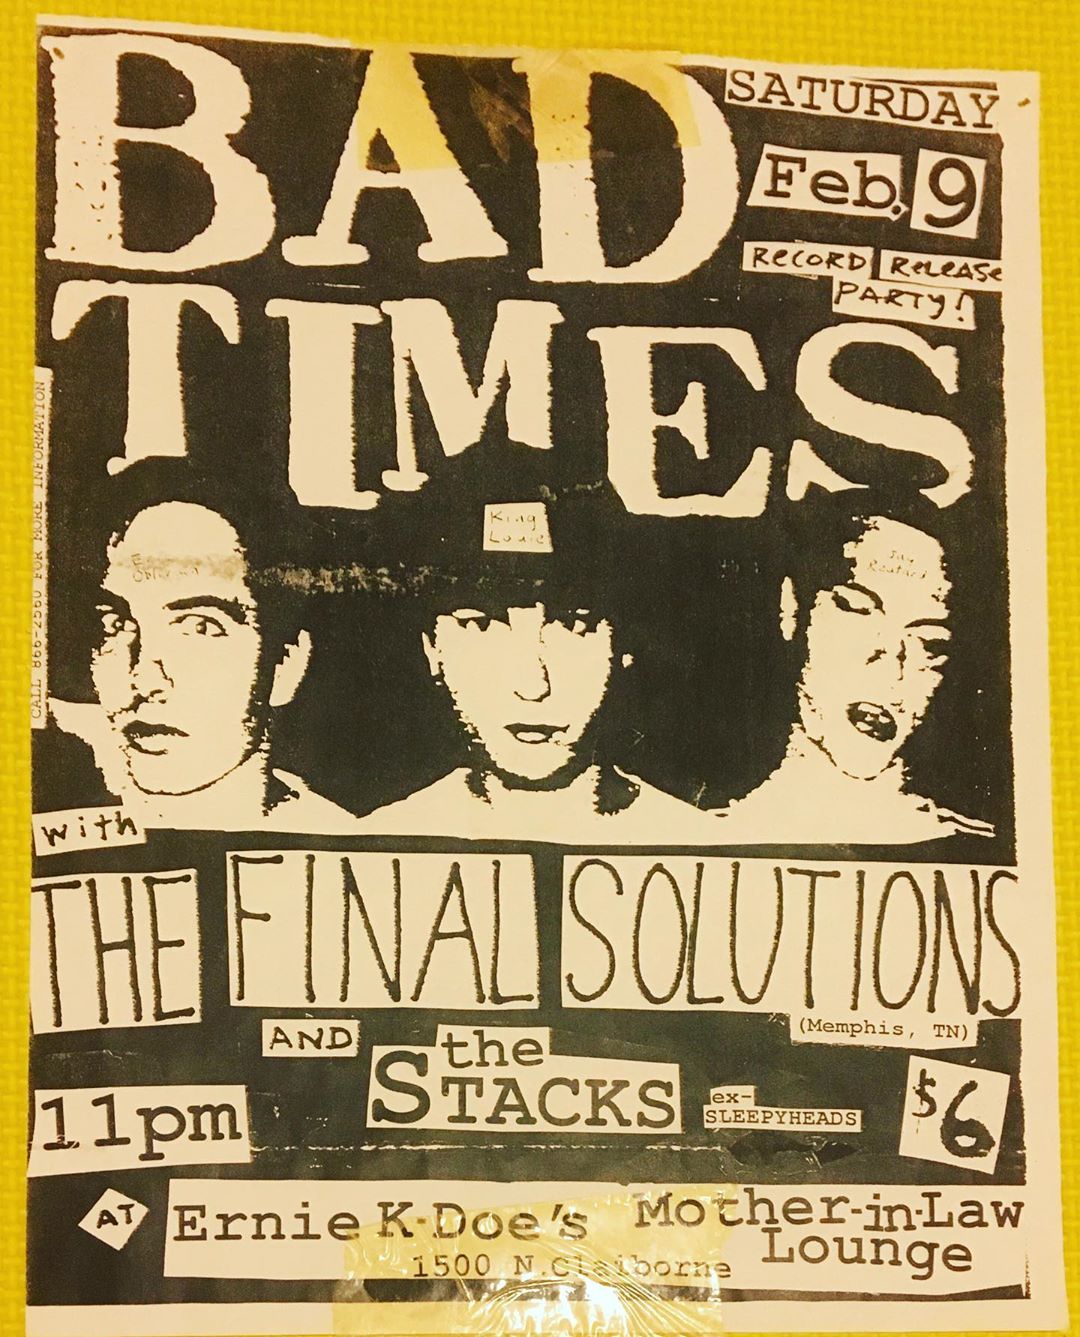 Flyer for Bad Times and Stacks at Ernie K-Doe's Mother-In Law Lounge